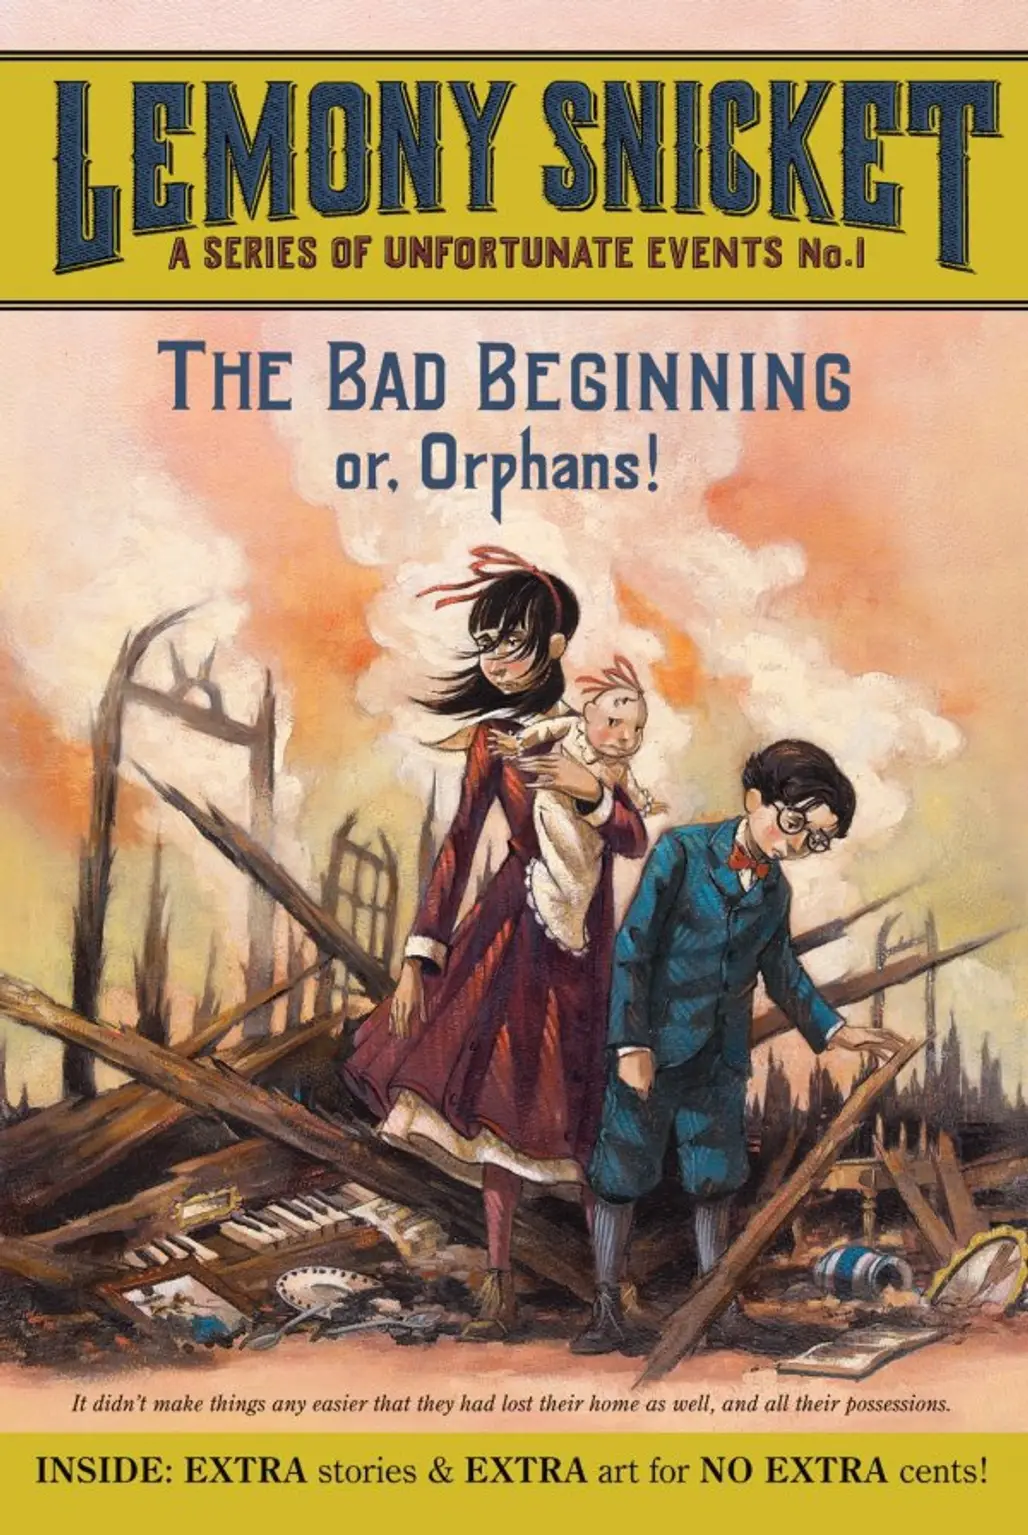 The Bad Beginning: or, Orphans!